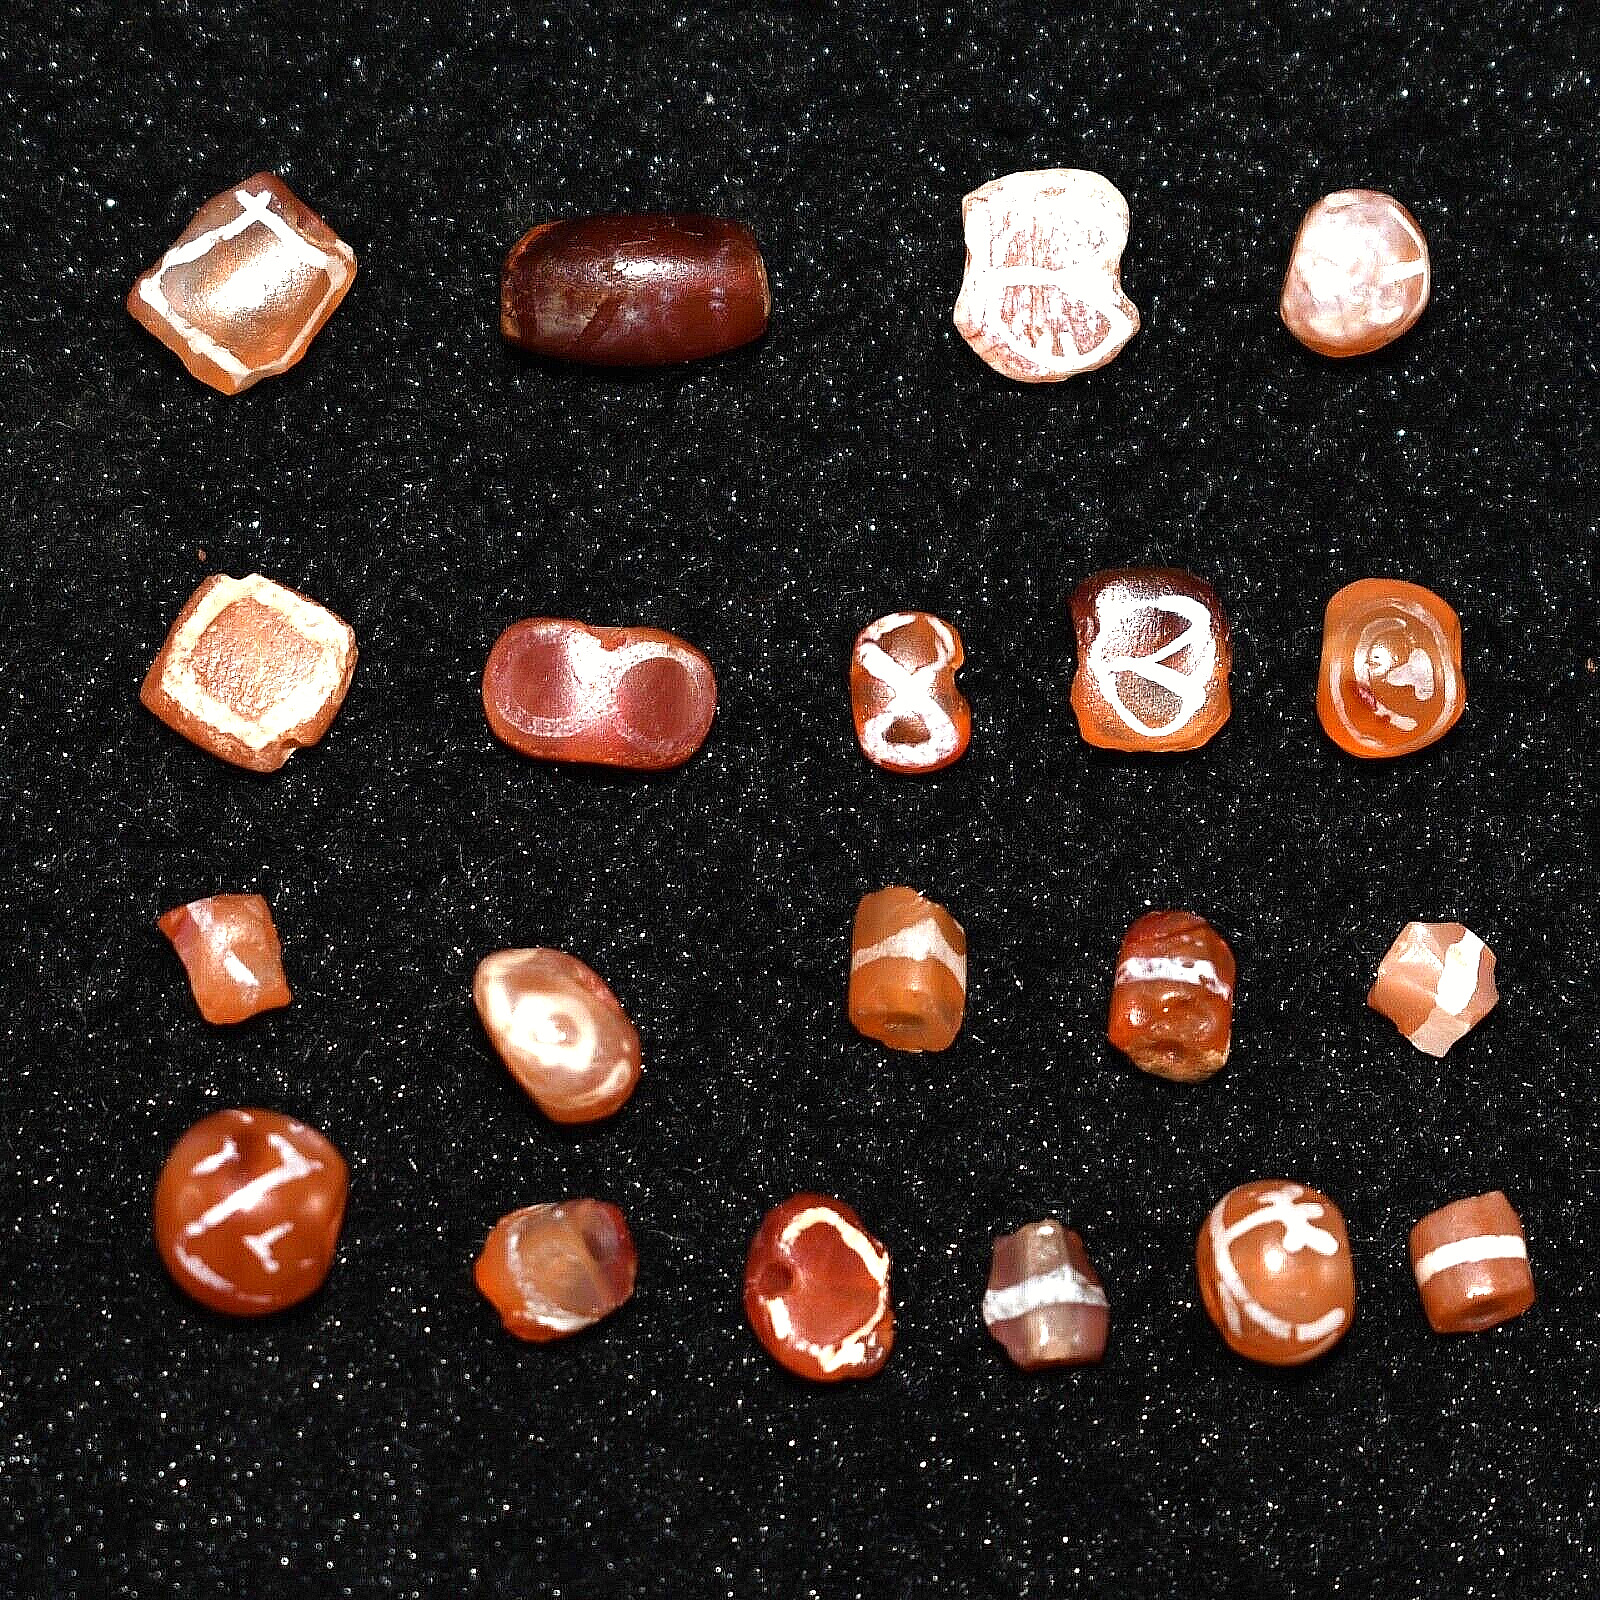 20 Ancient Longevity Etched Carnelian Beads in good Condition over 2000 Year Old